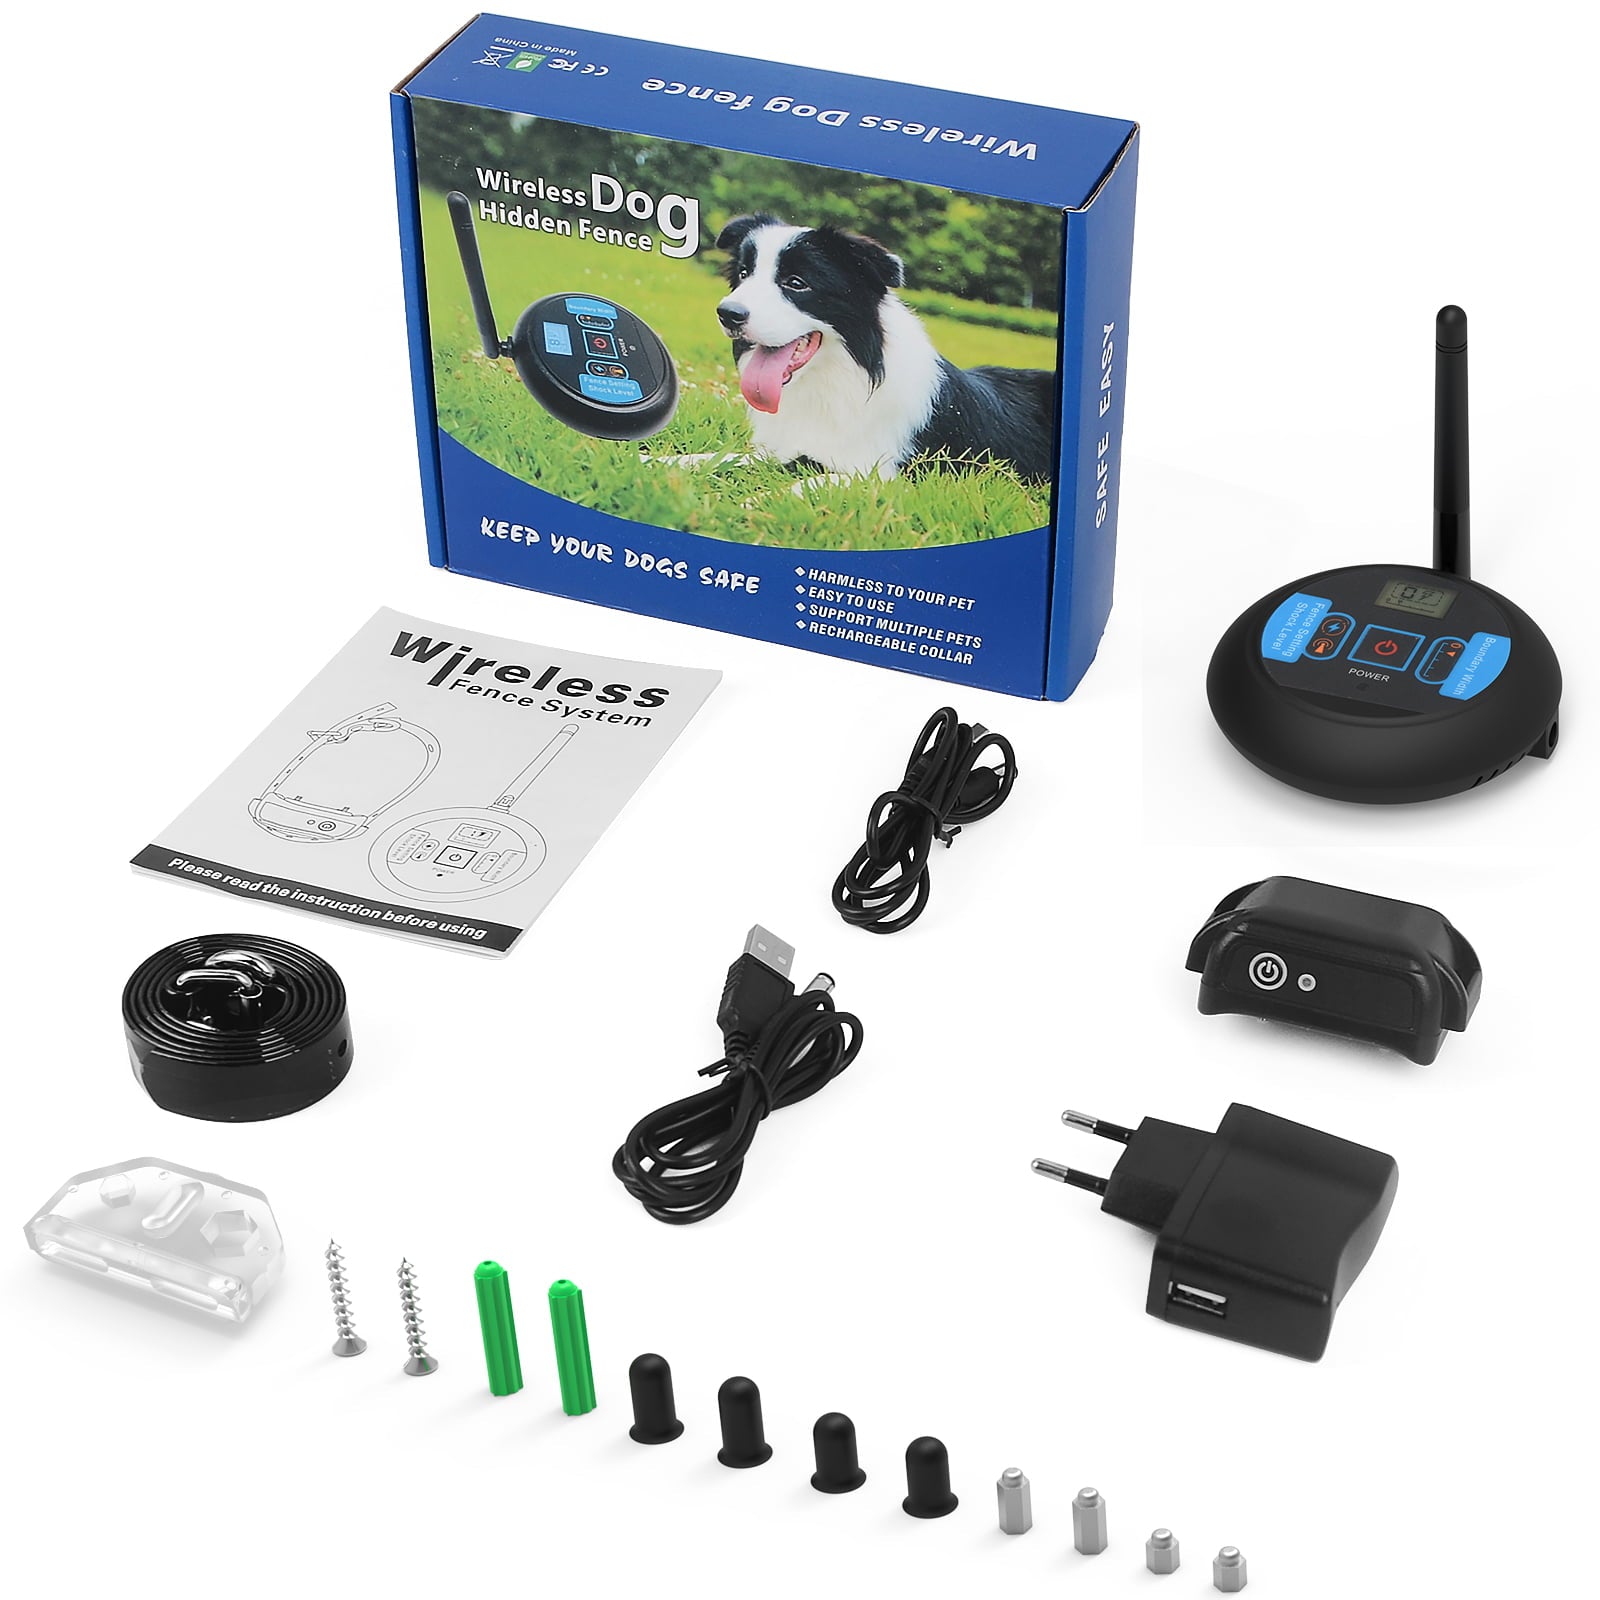 Wodondog Wireless Dog Invisible Fence for 1 Dog Signal Coverage Diameter 400M， Electric Fence and Containment System